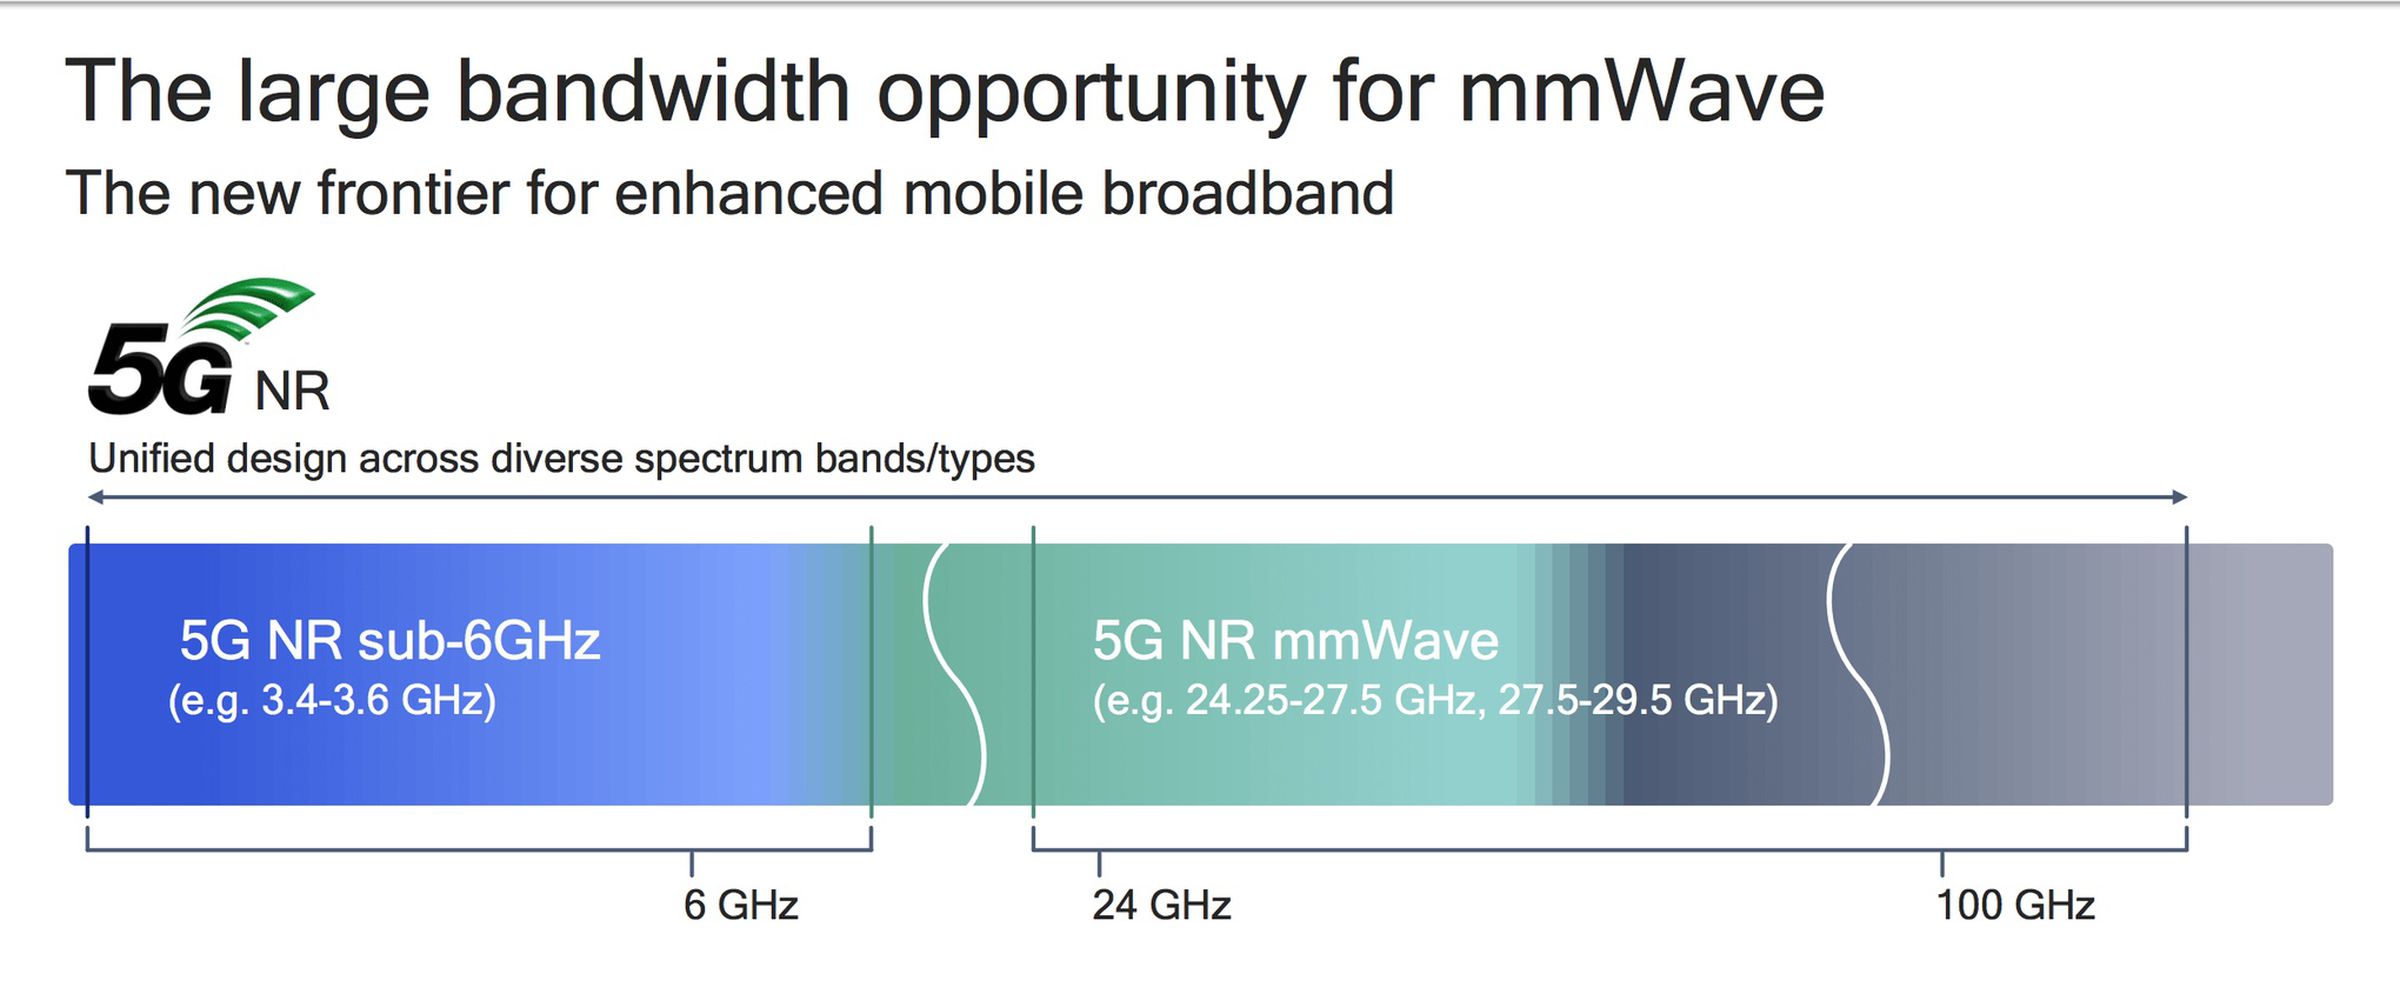 mmWave utilizes new spectrum, while sub-6GHz uses the same spectrum as existing 4G networks.